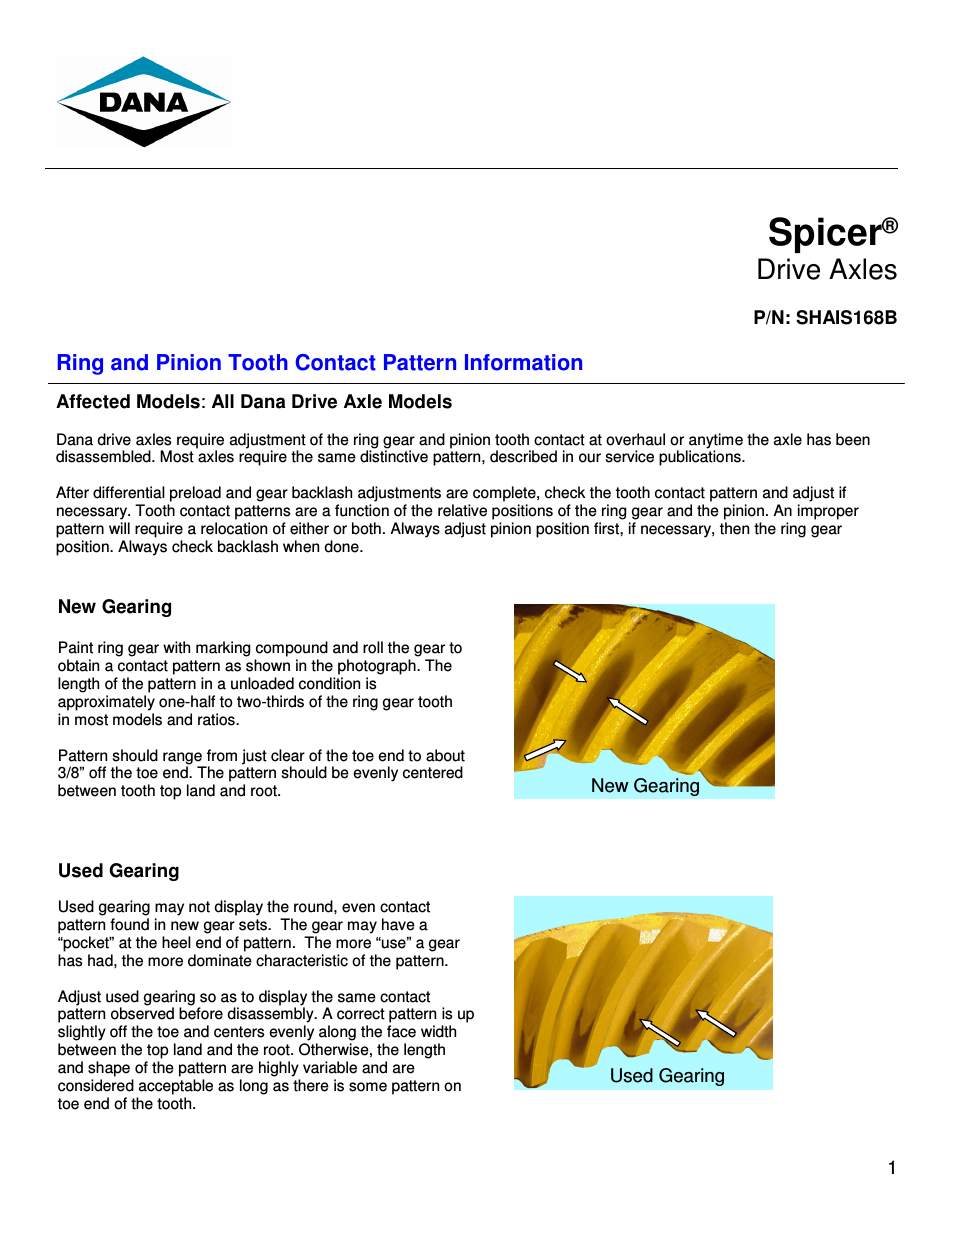 Ring and Pinion Tooth Contact Pattern Information